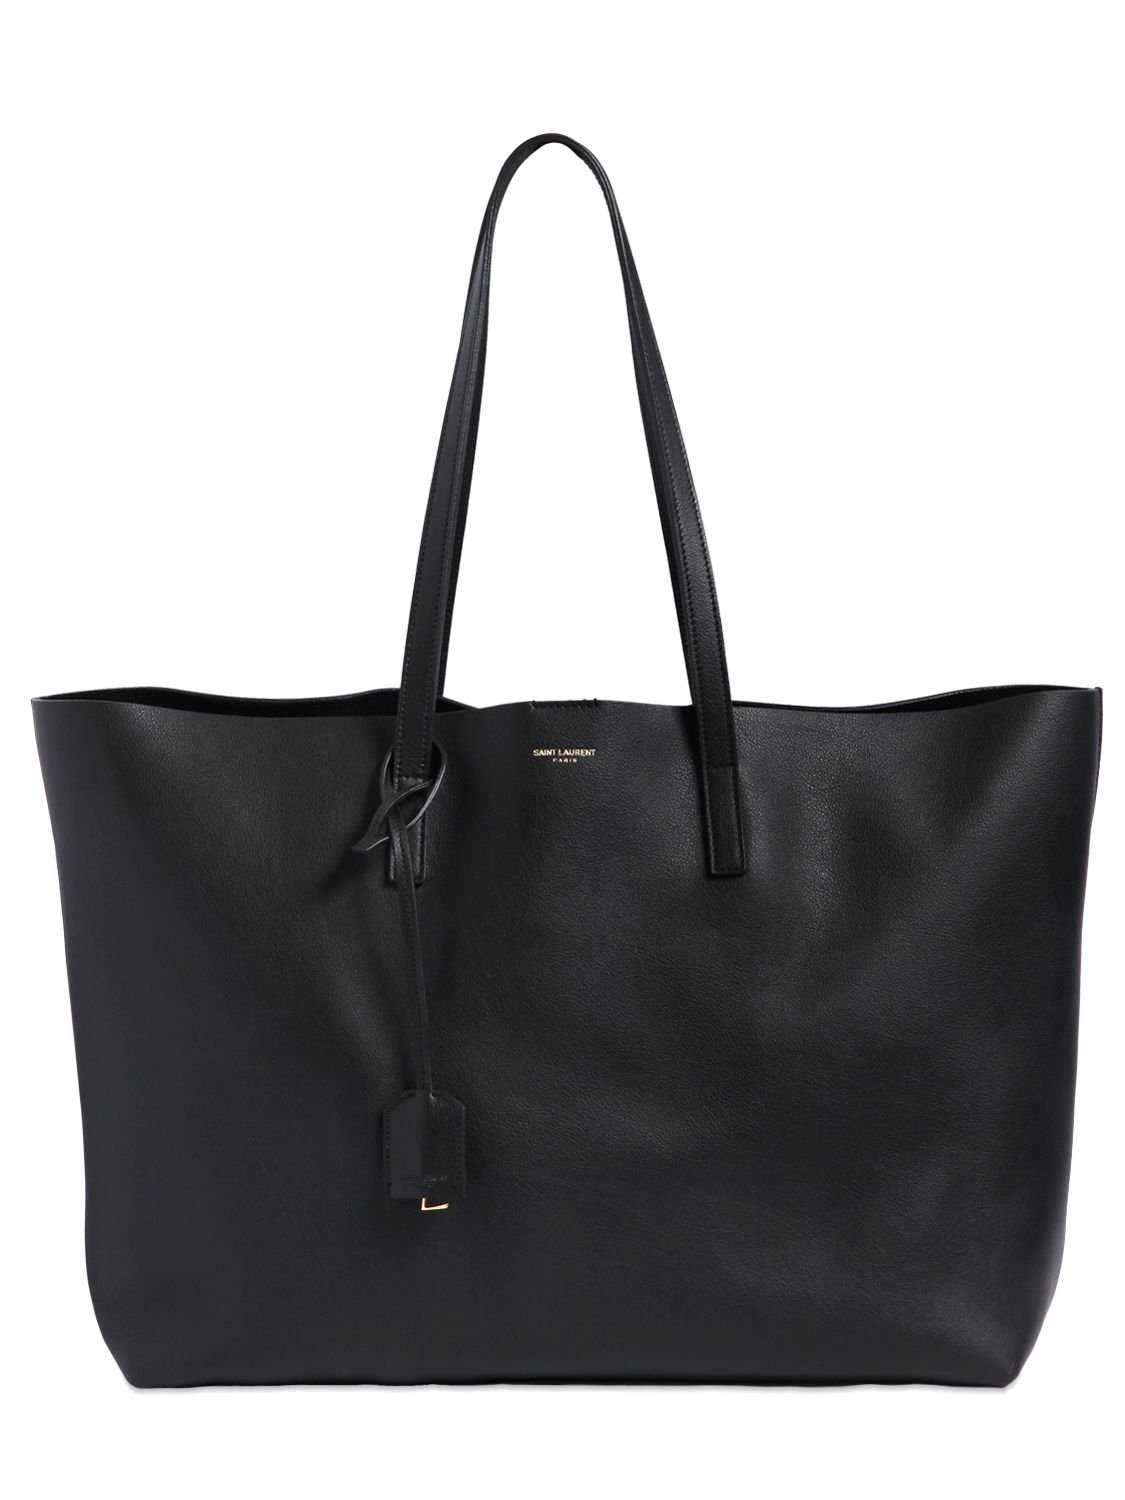 Black Leather Tote Bag | IUCN Water